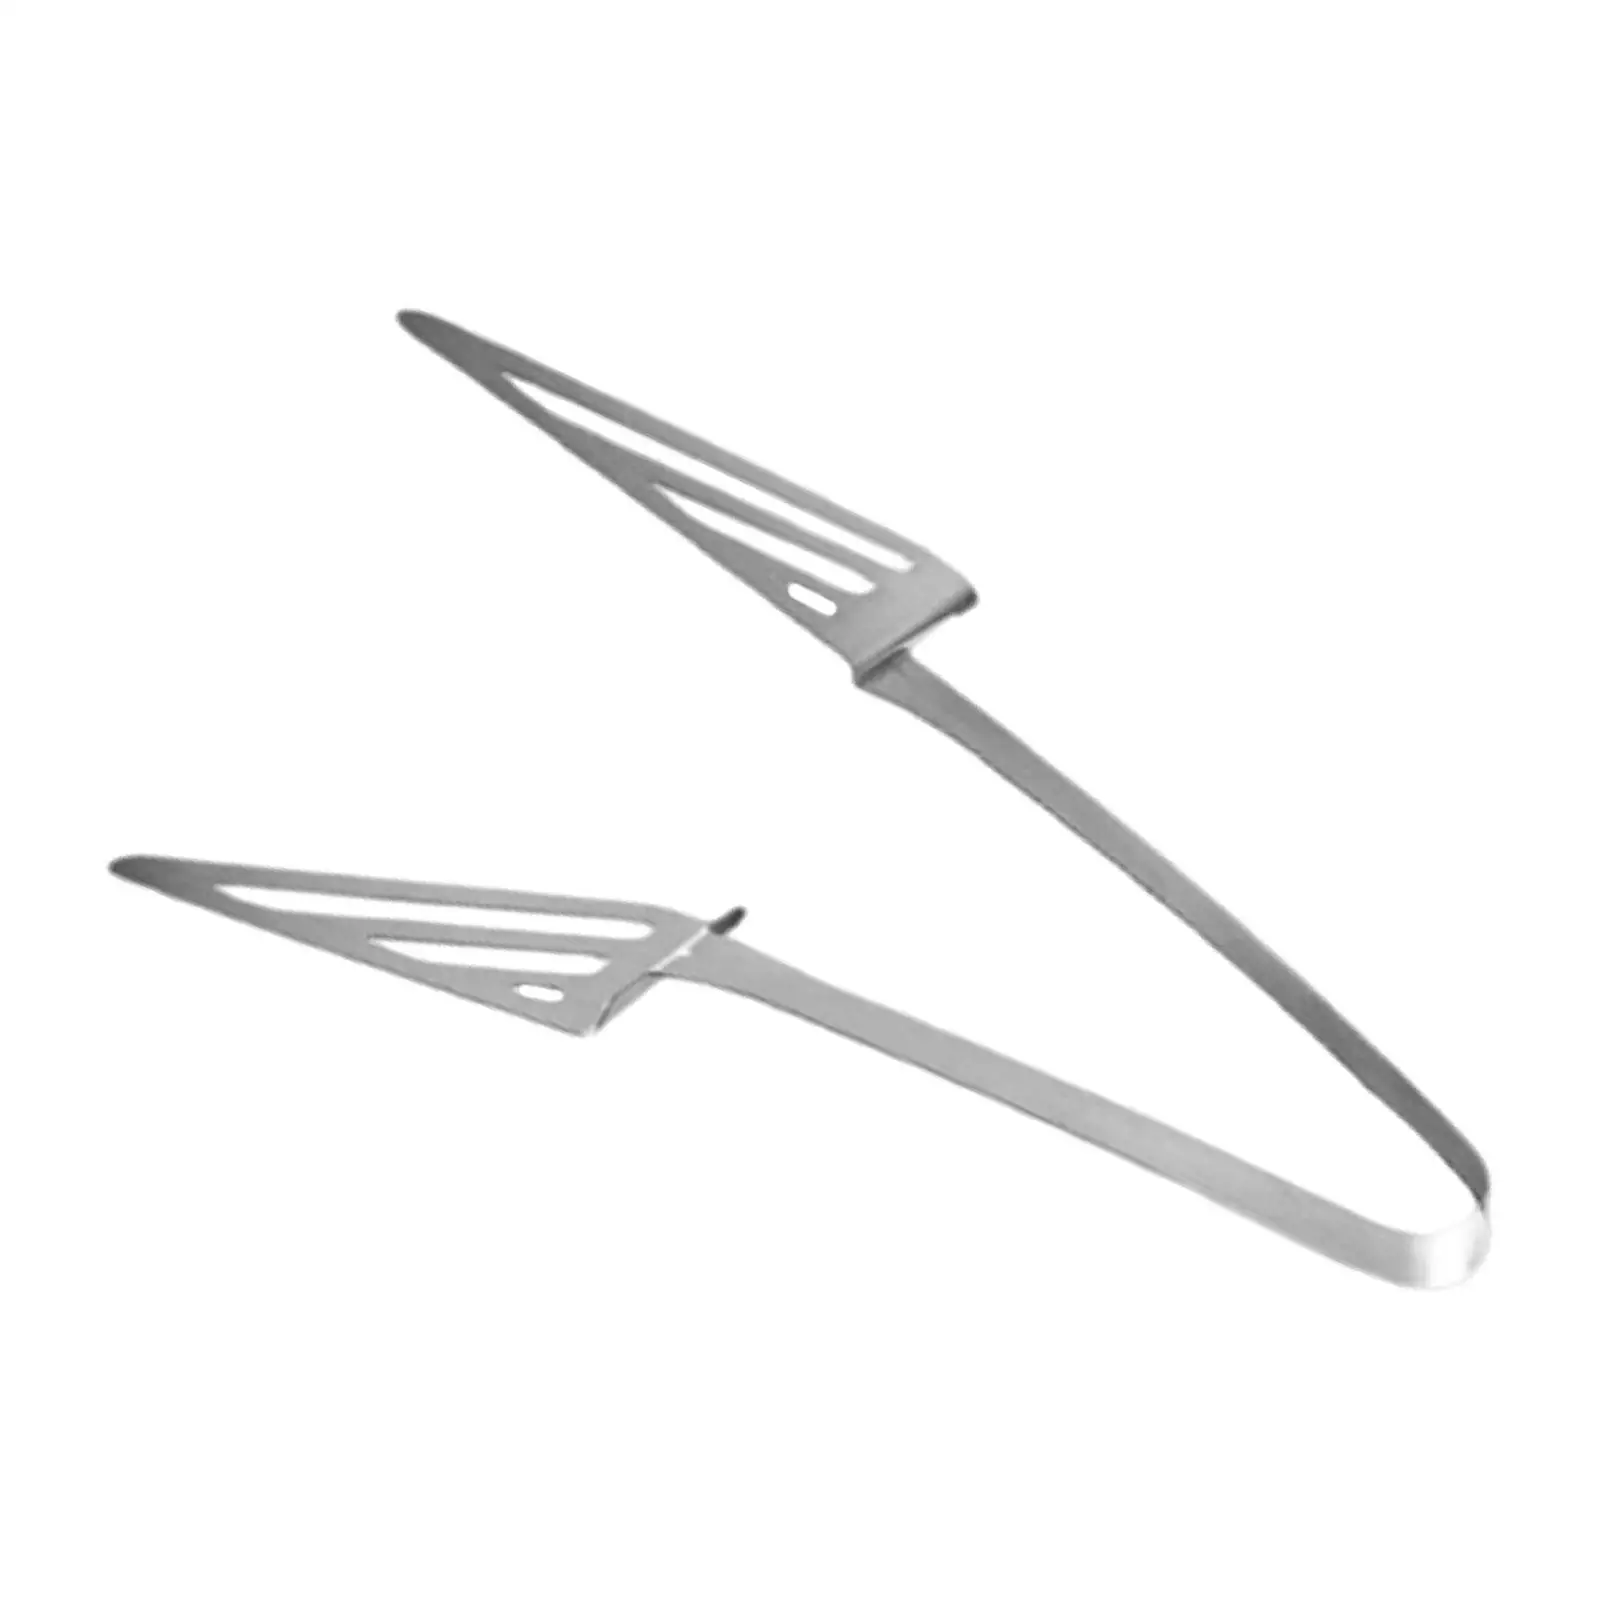 Serving Tongs Pastry Clamp Multipurpose Kitchen Gadgets Utility Tongs Food Tongs for BBQ Restaurant Kitchen Biscuit